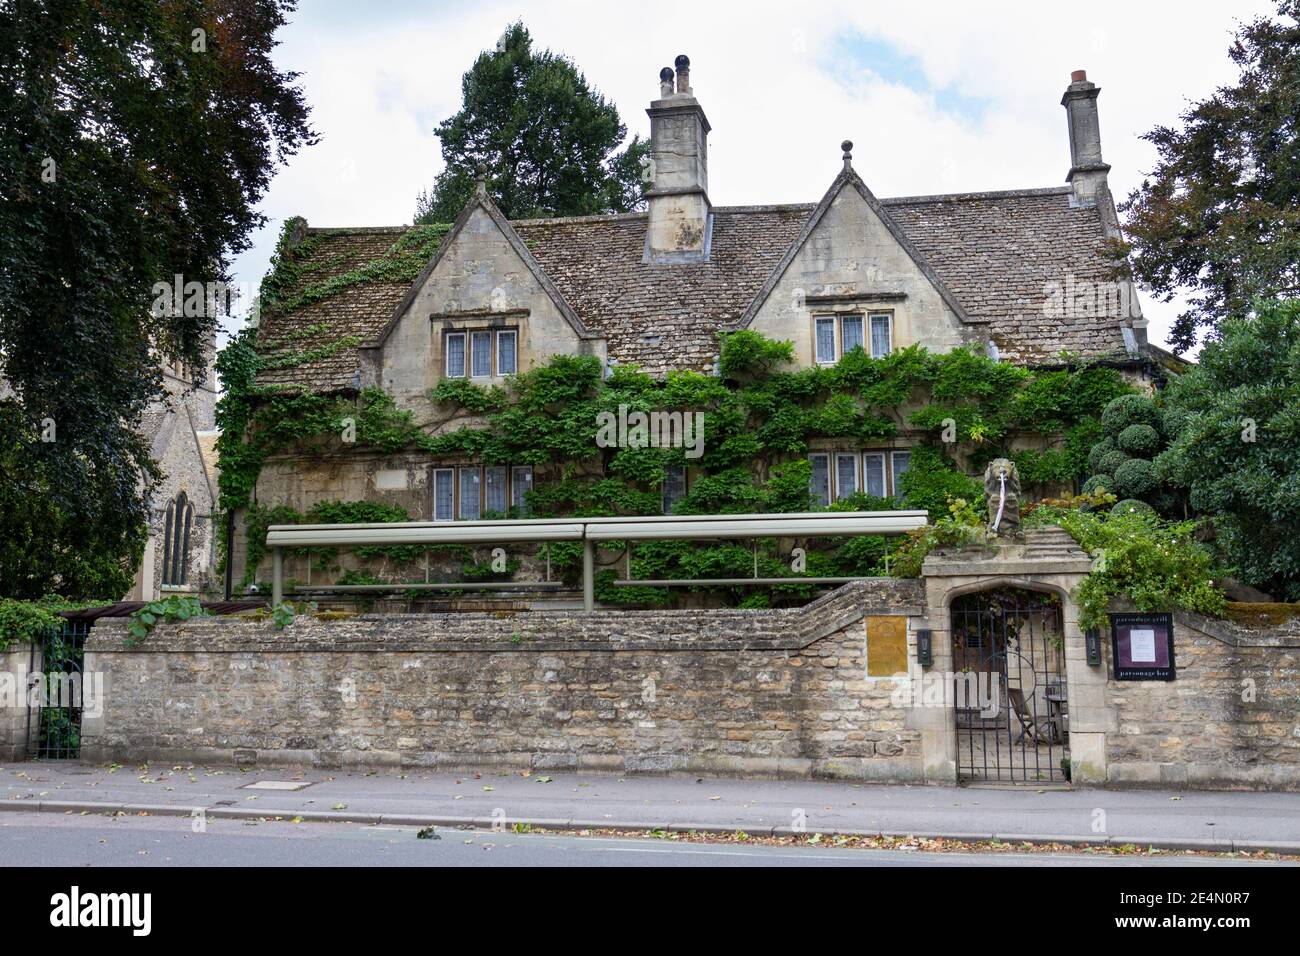 The Old Parsonage Hotel, a 17th century Old Parsonage, on Banbury Road, Oxford, Oxfordshire, UK Stock Photo